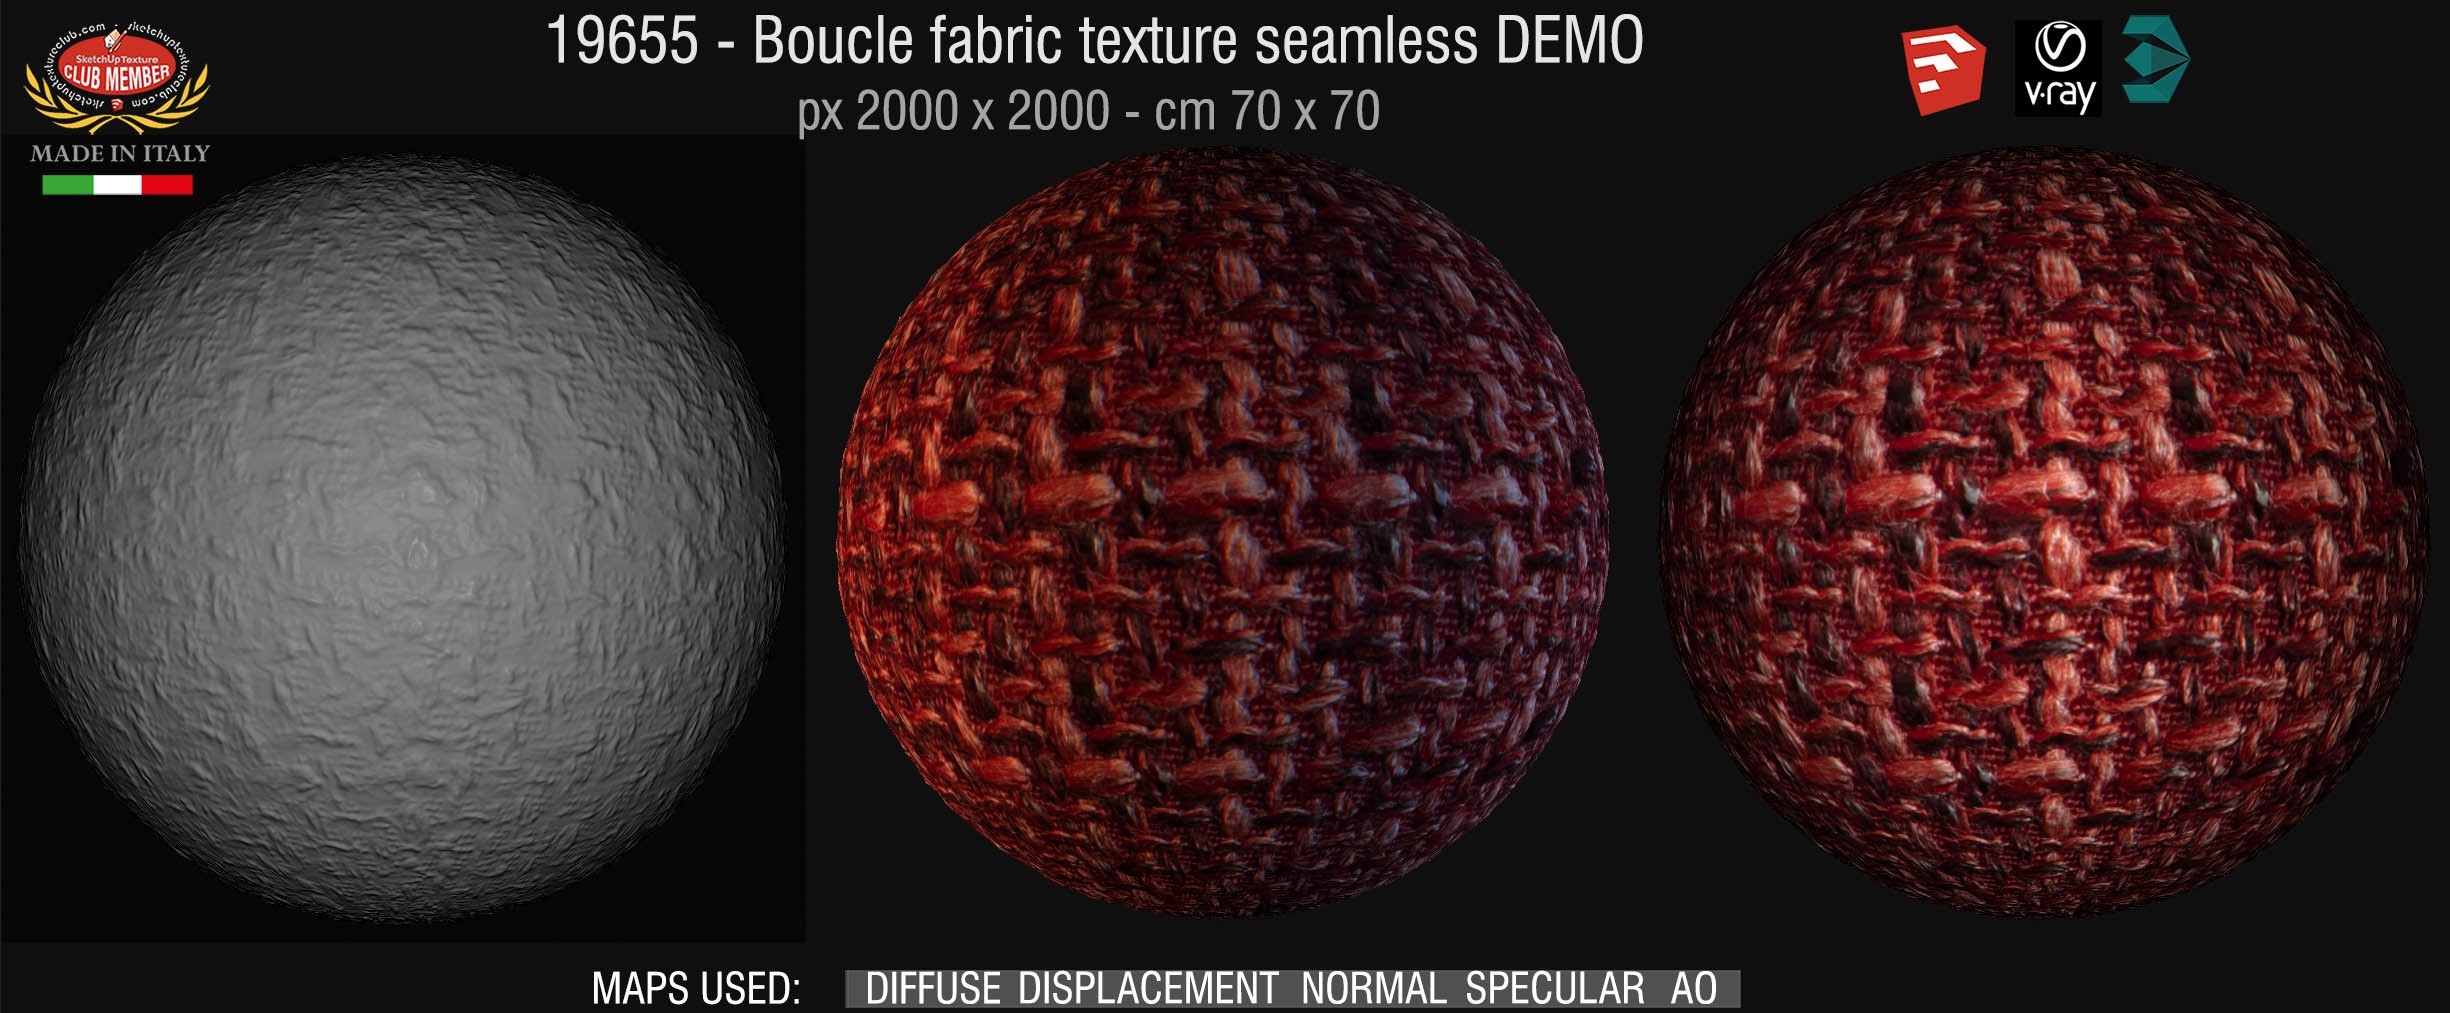 19655 Boucle fabric texture seamless + maps DEMO